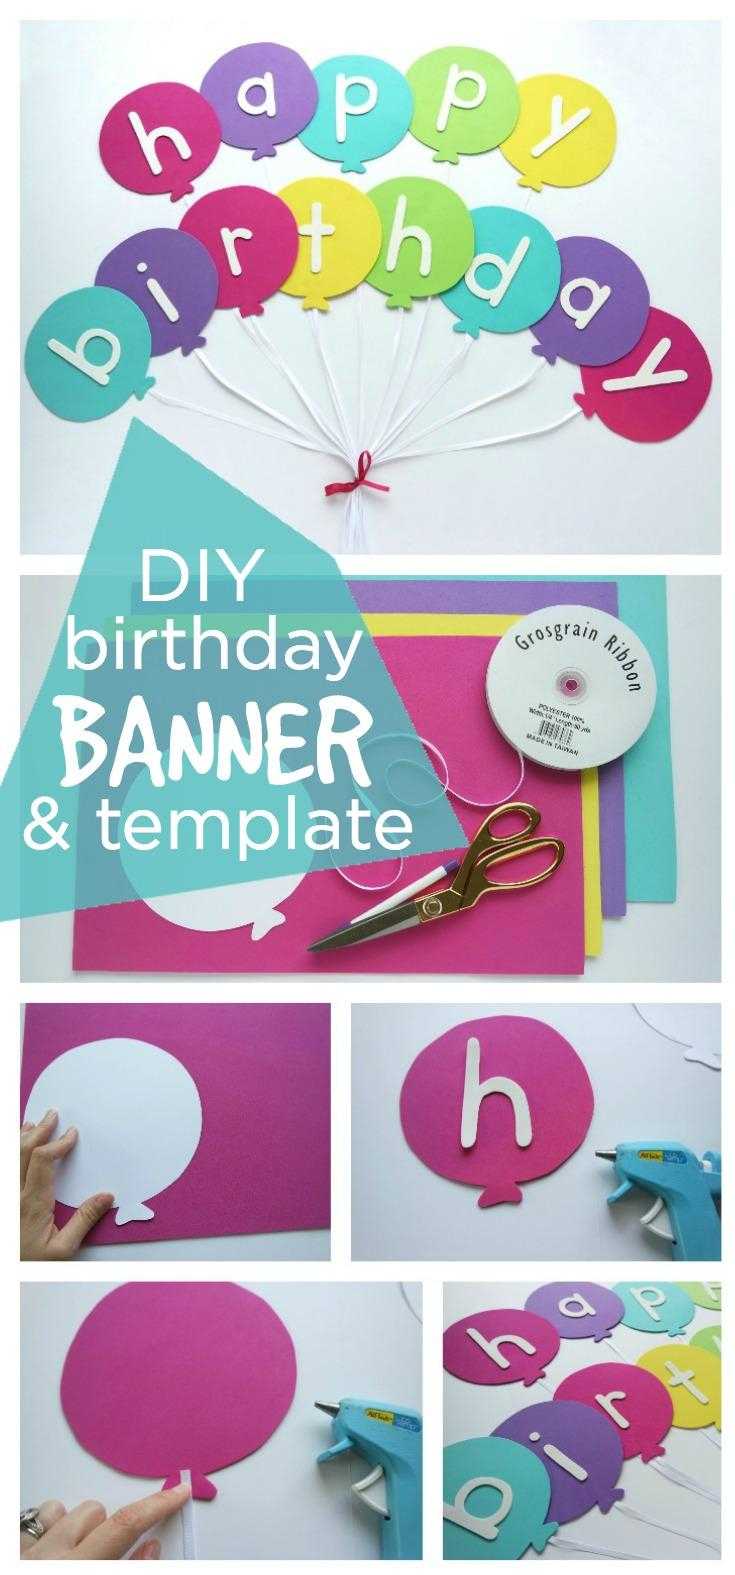 30 Creative Diy Birthday Banner Ideas – Page 16 – Foliver Blog With Regard To Diy Party Banner Template